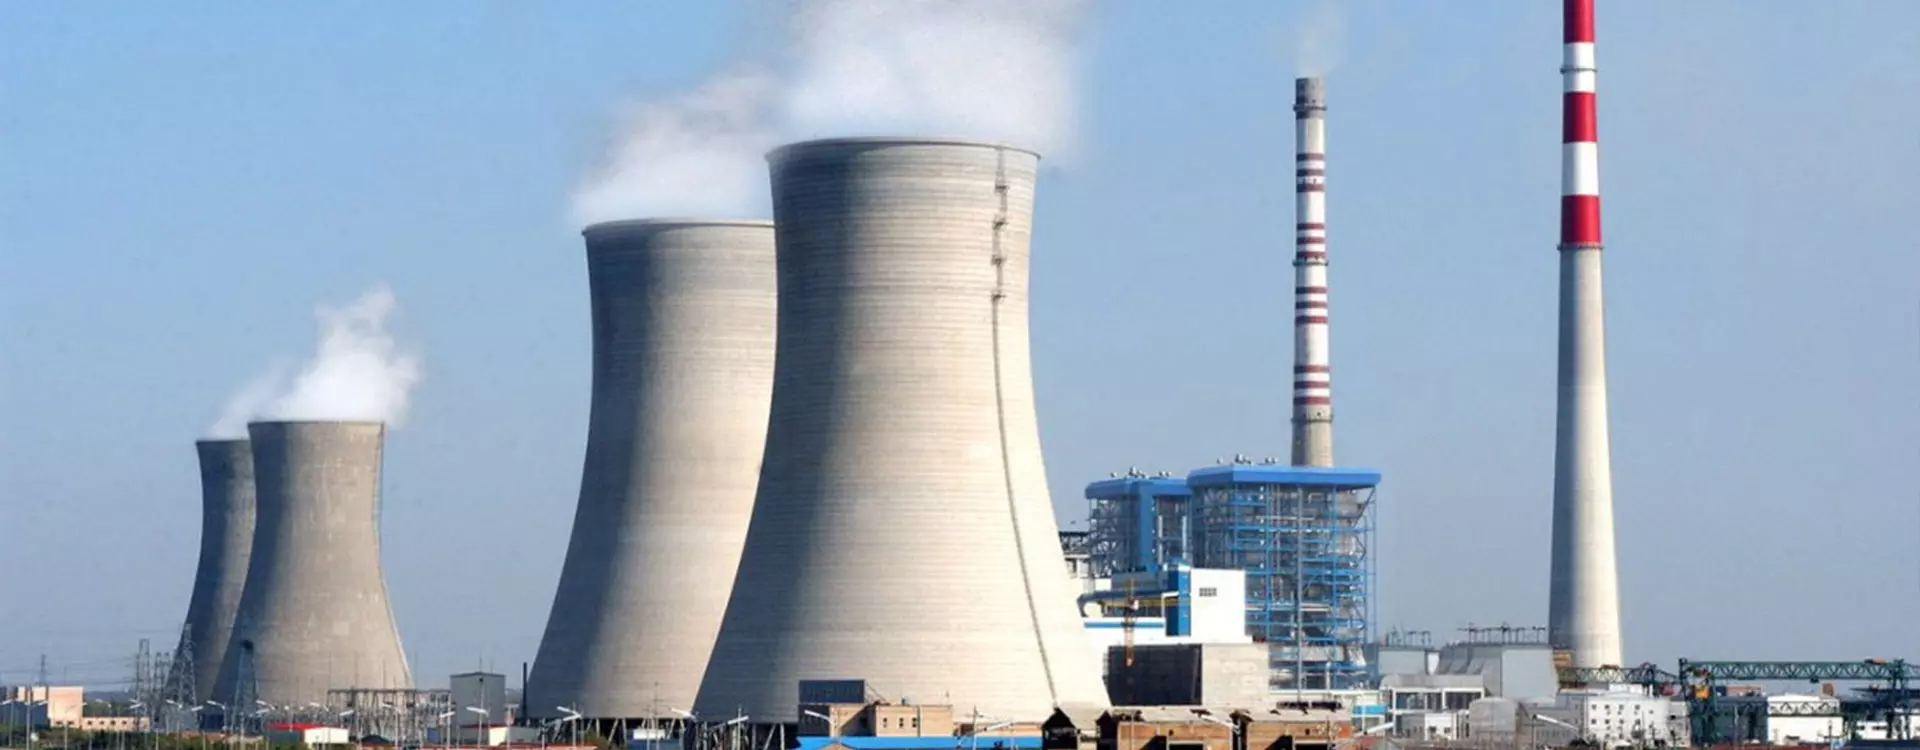 Almost 88 GW thermal capacity to be added to meet rising power demand: R K Singh